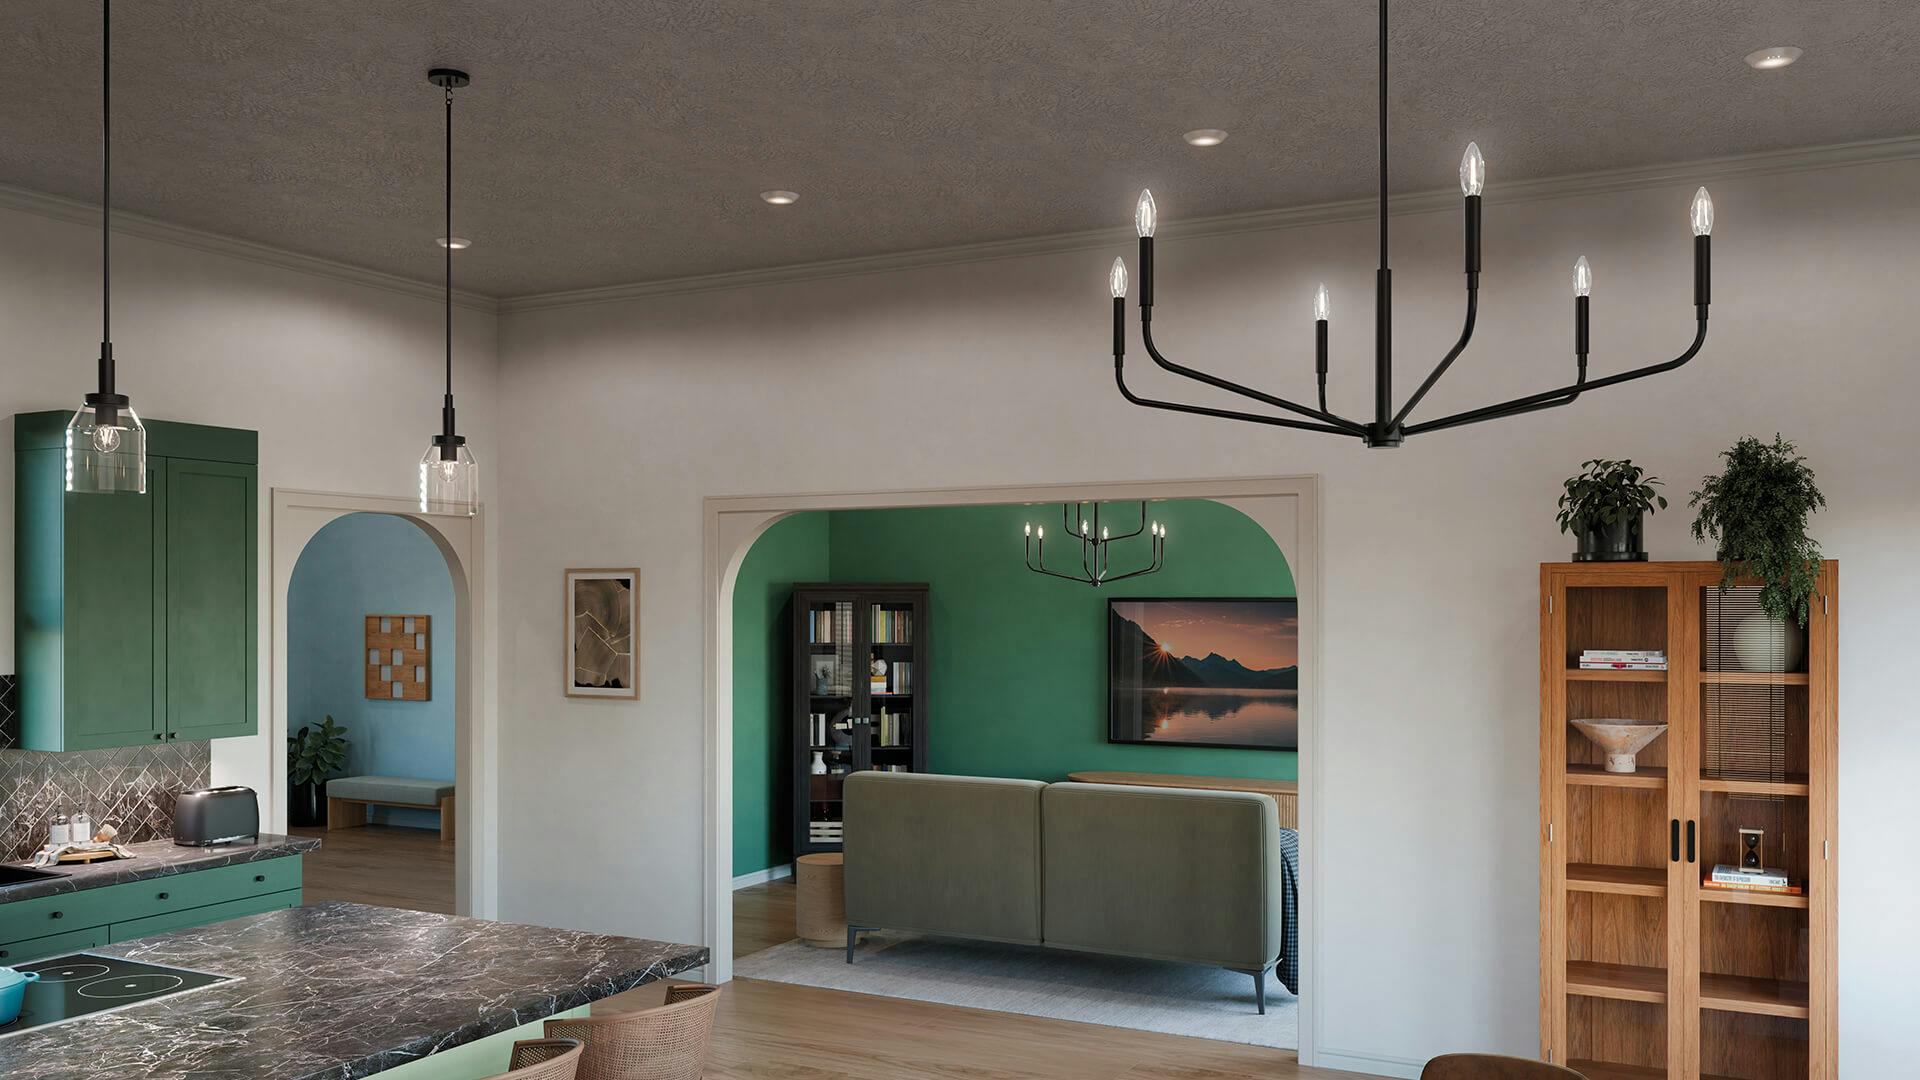 Open kitchen to living room with Madden chandelier in black finish and horizon select downlights